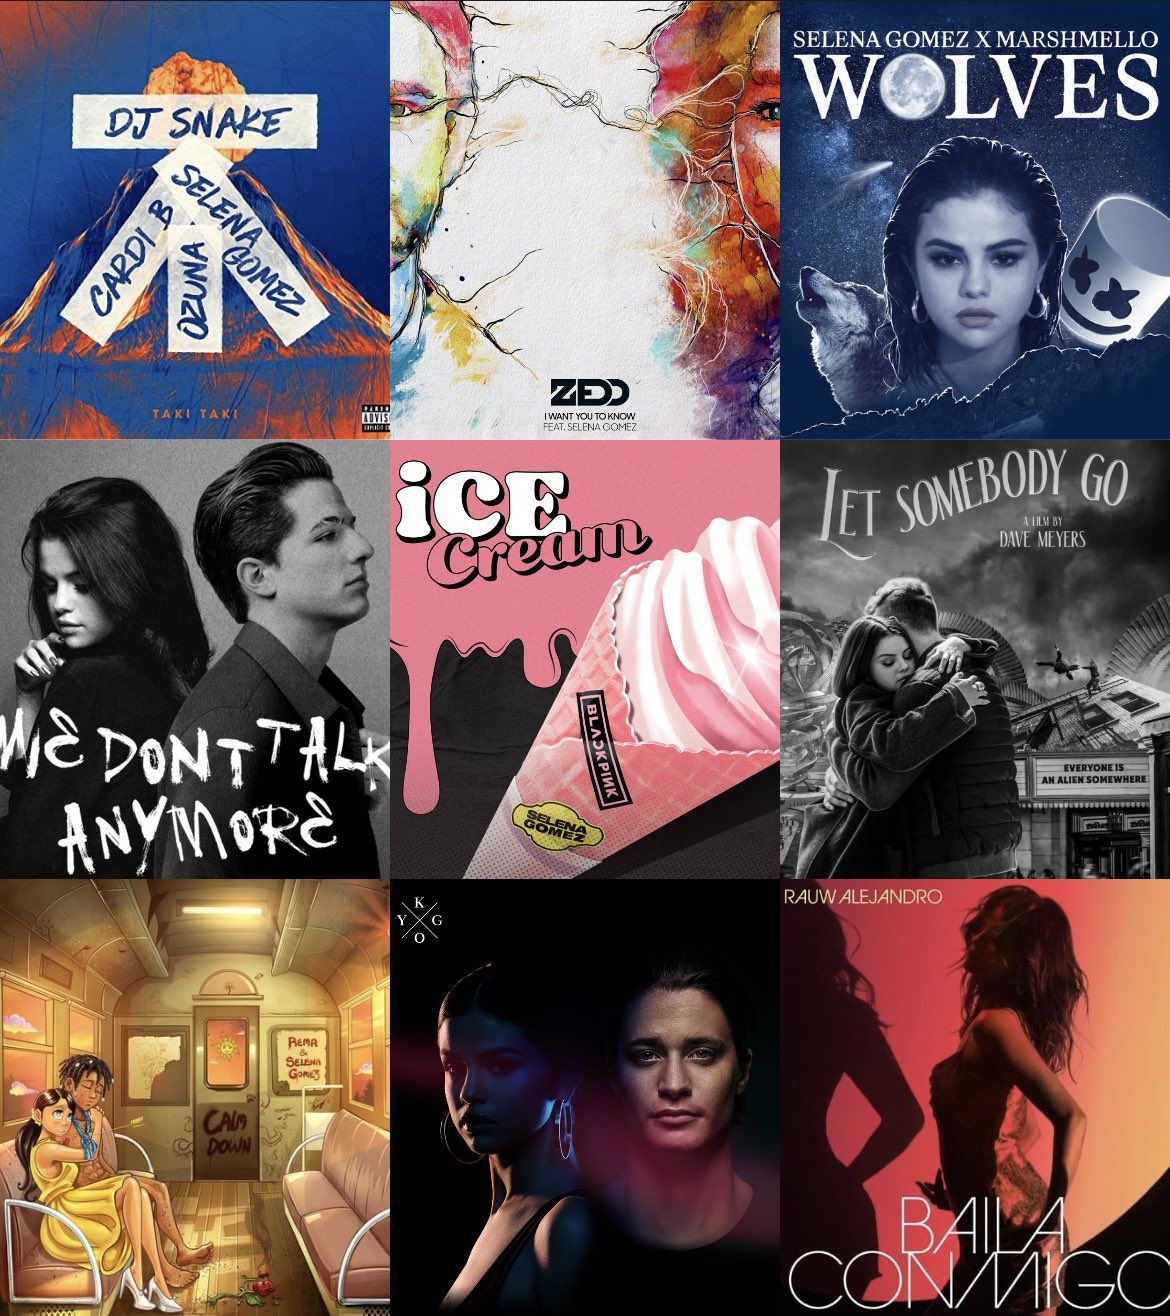 A collage of album covers including DJ Snake, Selena Gomez, and Zedd. - Riverdale